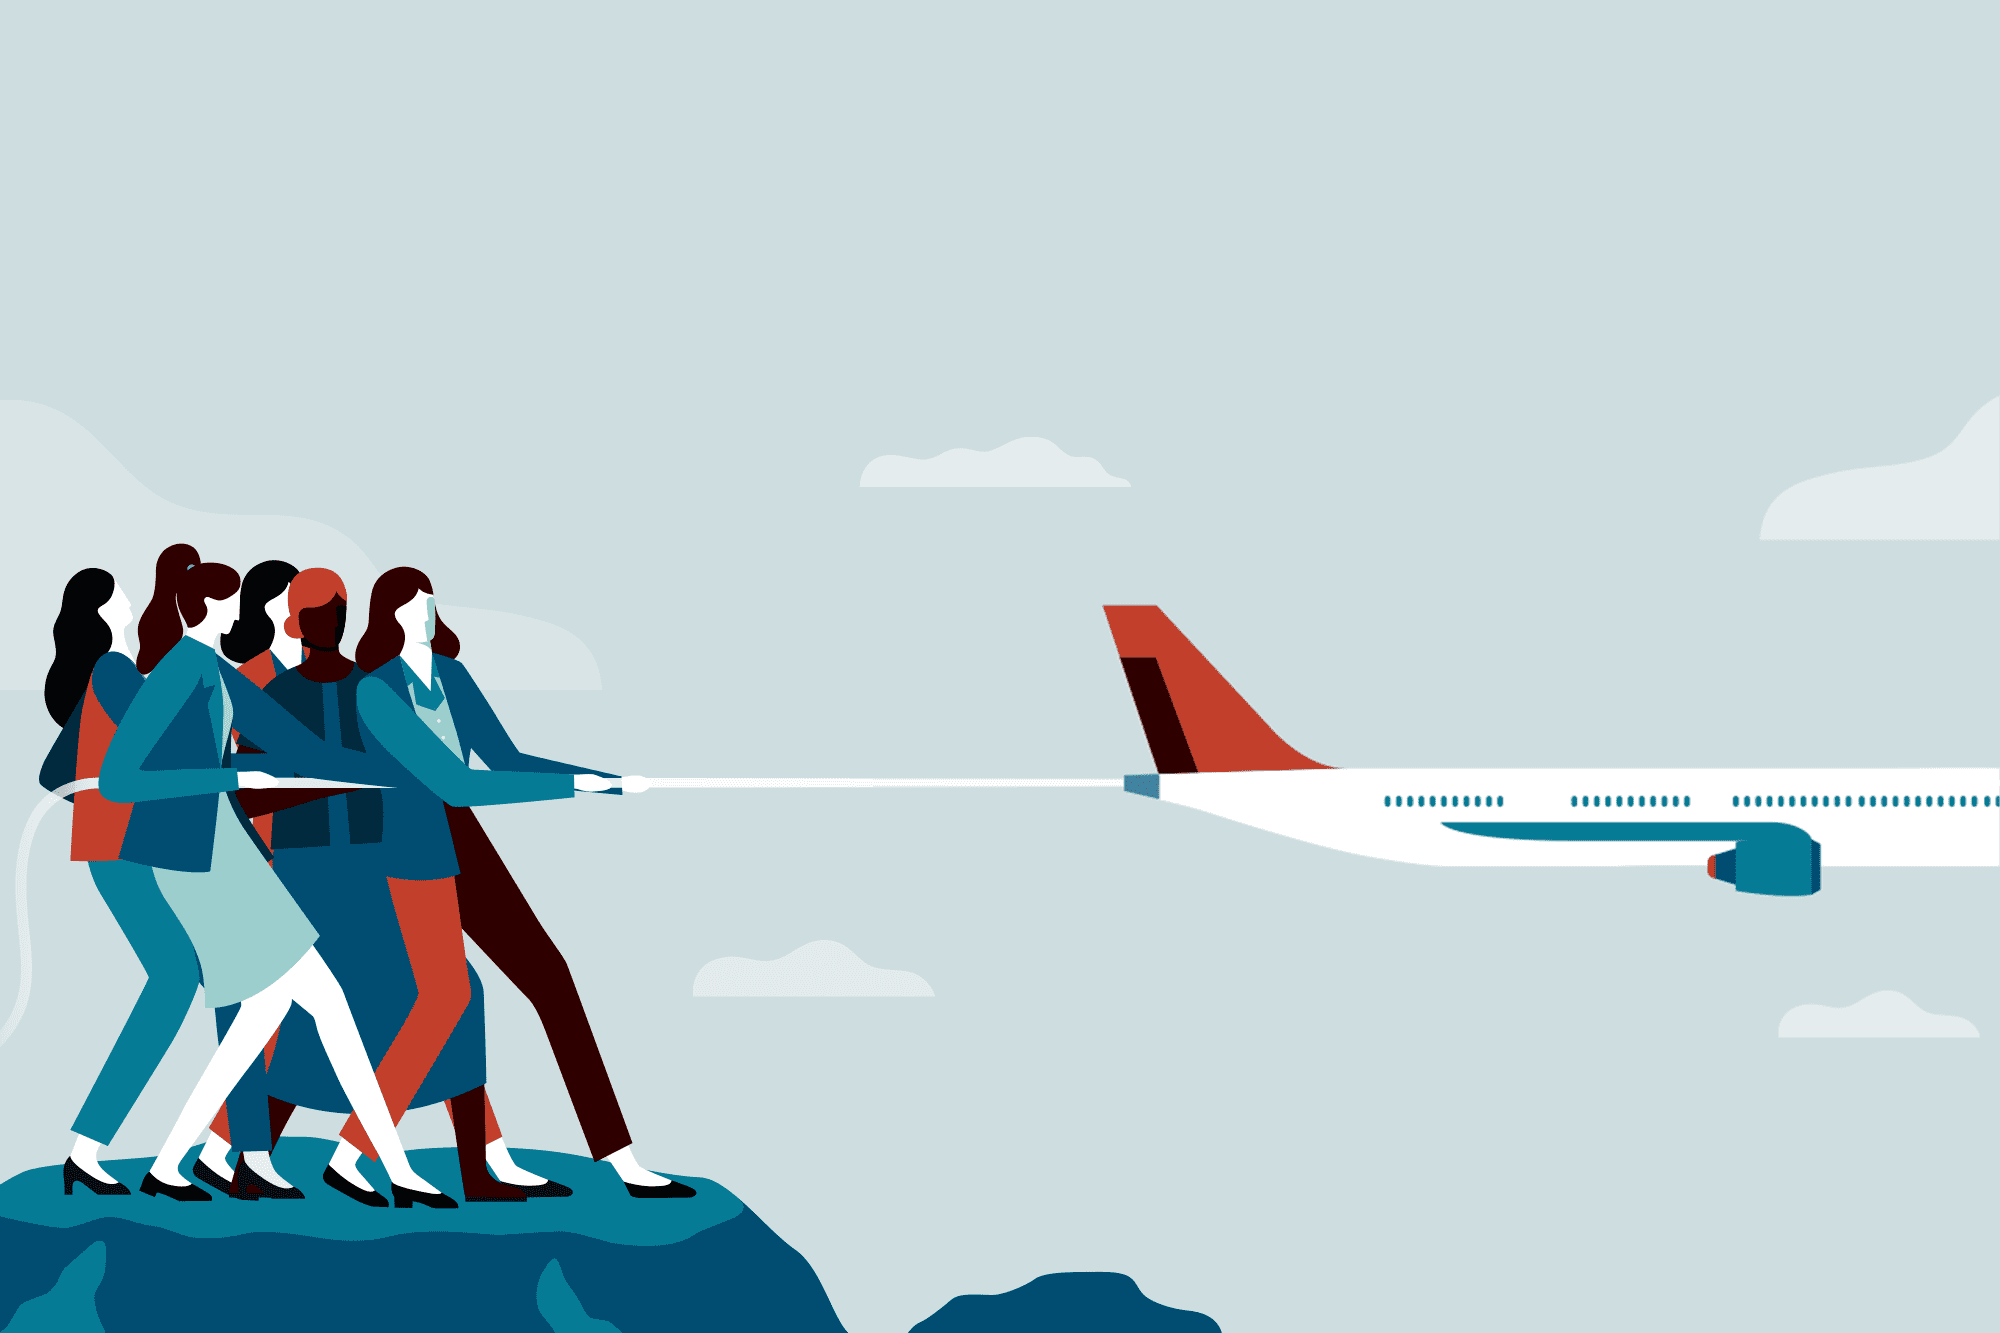 Even in 2019, airlines have very few women in senior management positions. 